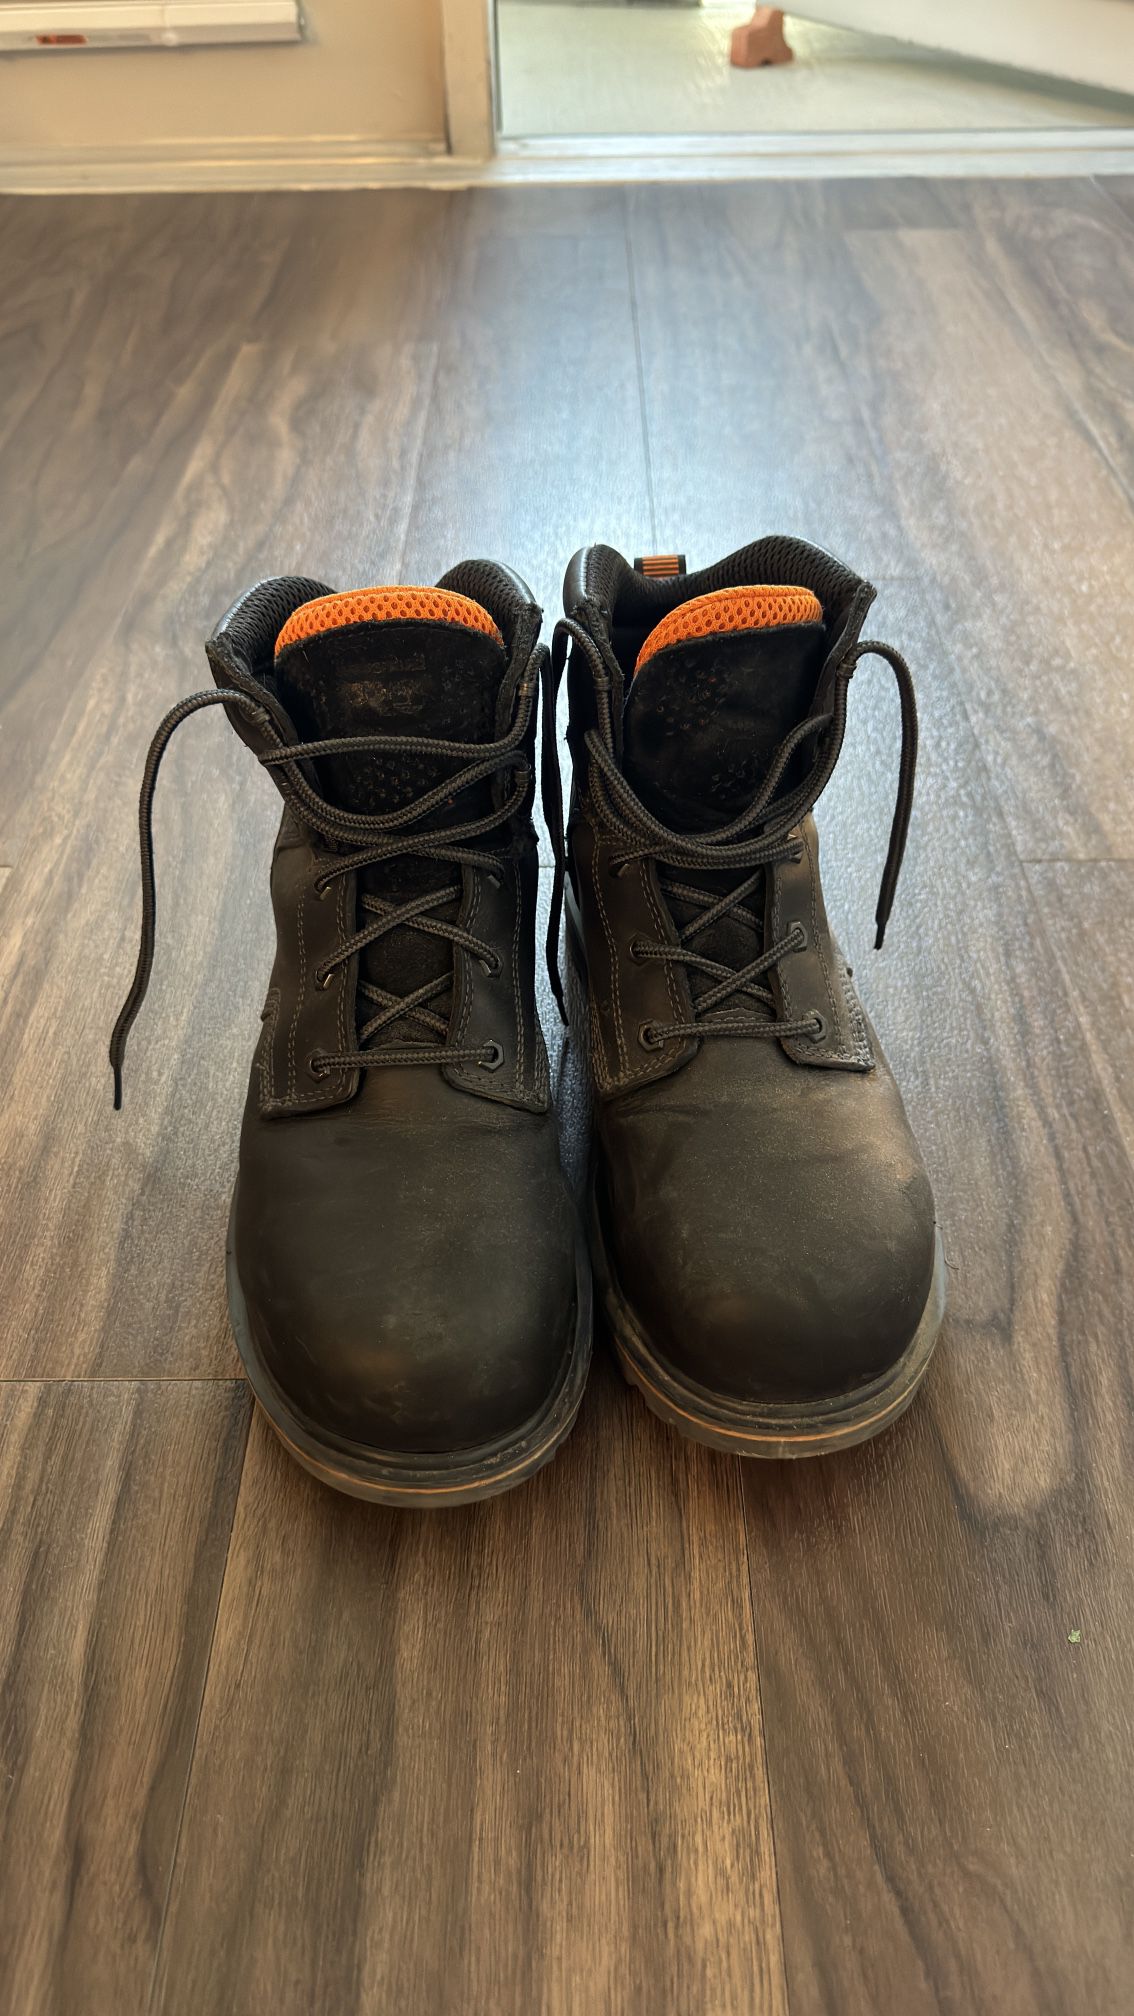 Timberland Pro Work boots - Steel Toe 